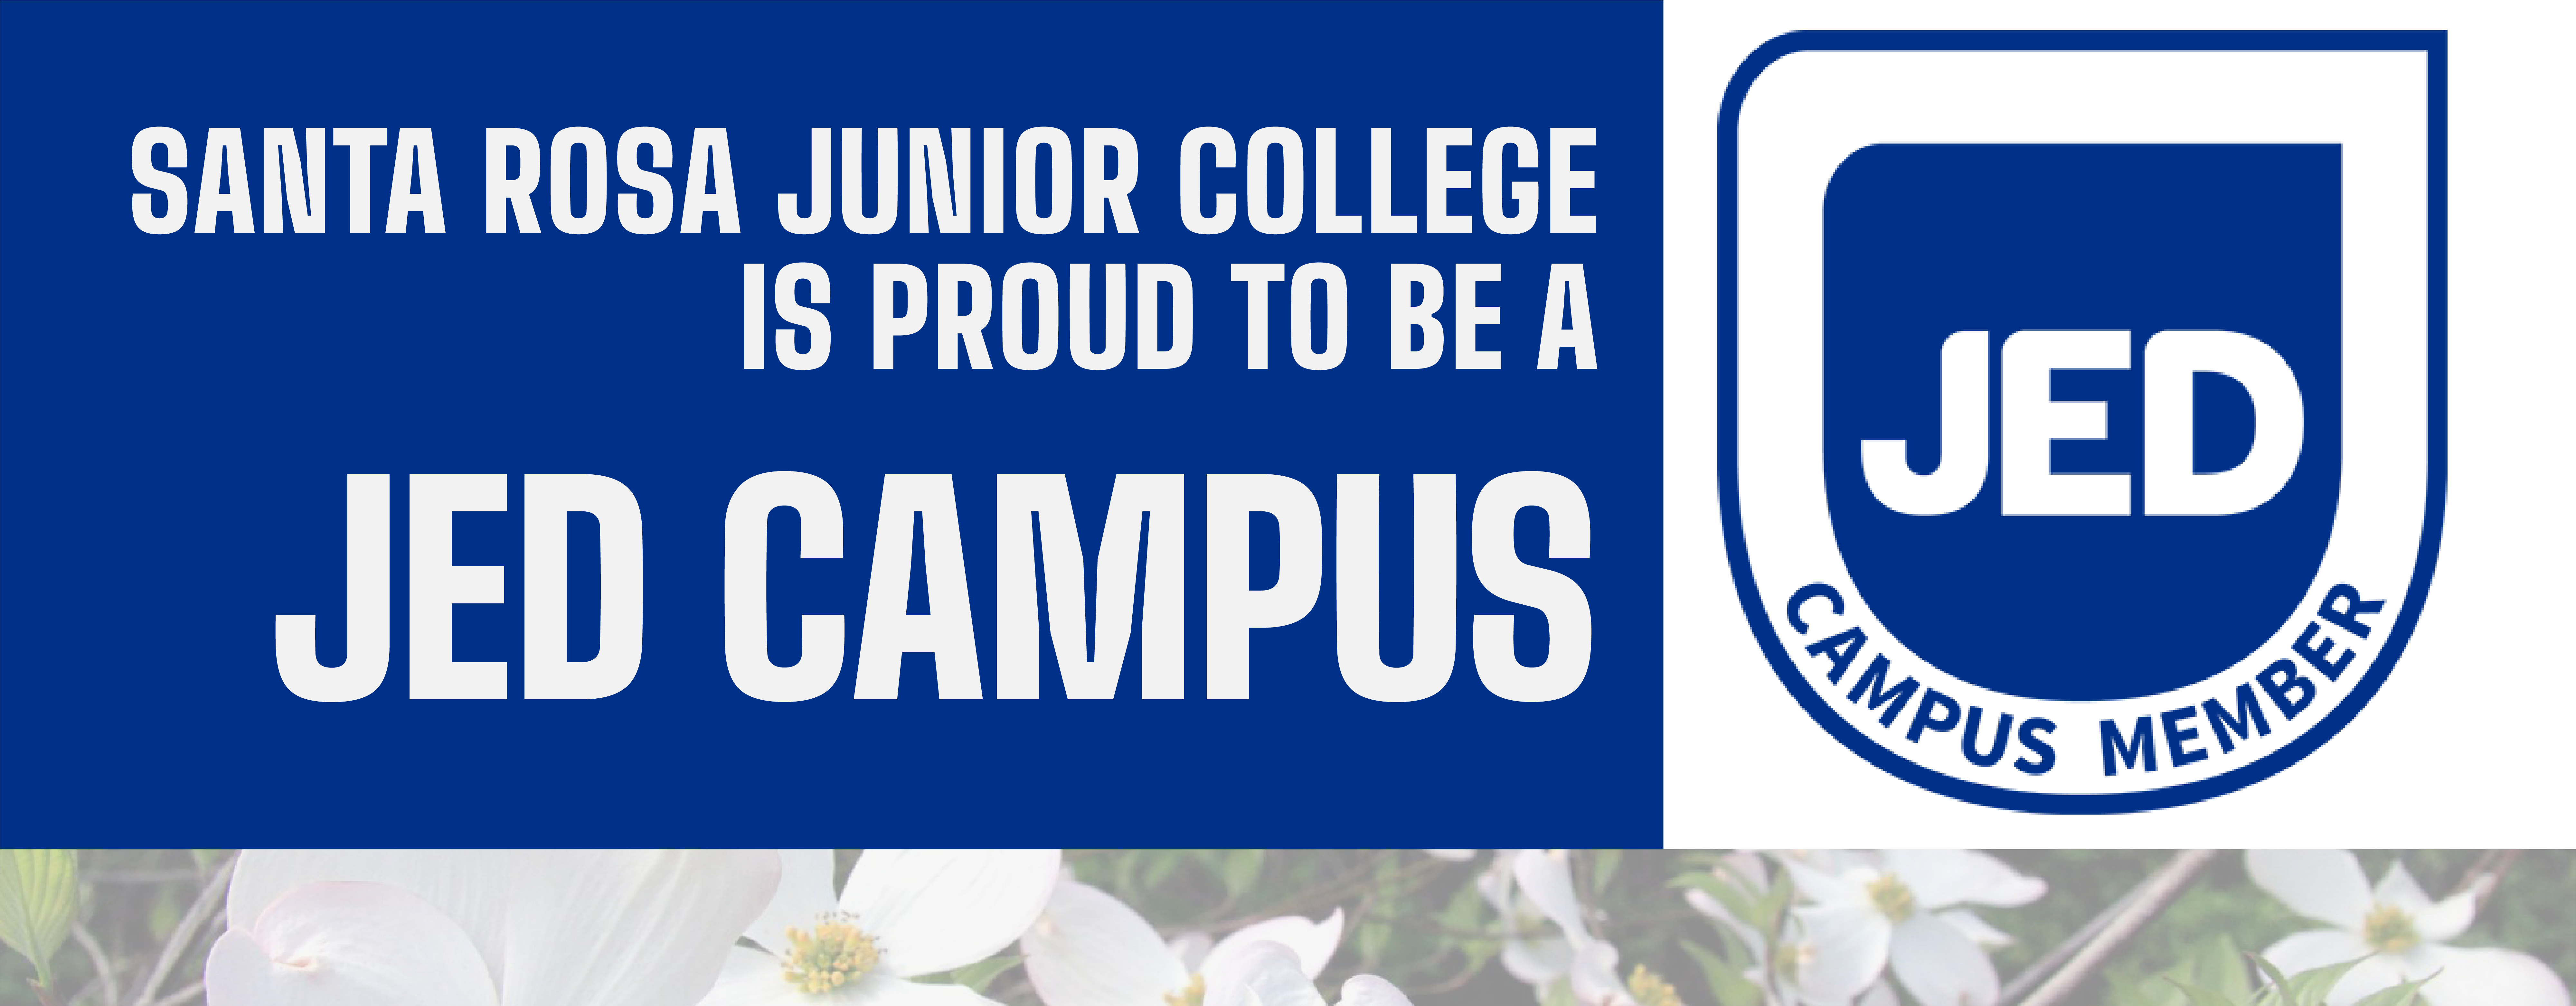 SRJC is proud to be a JED campus